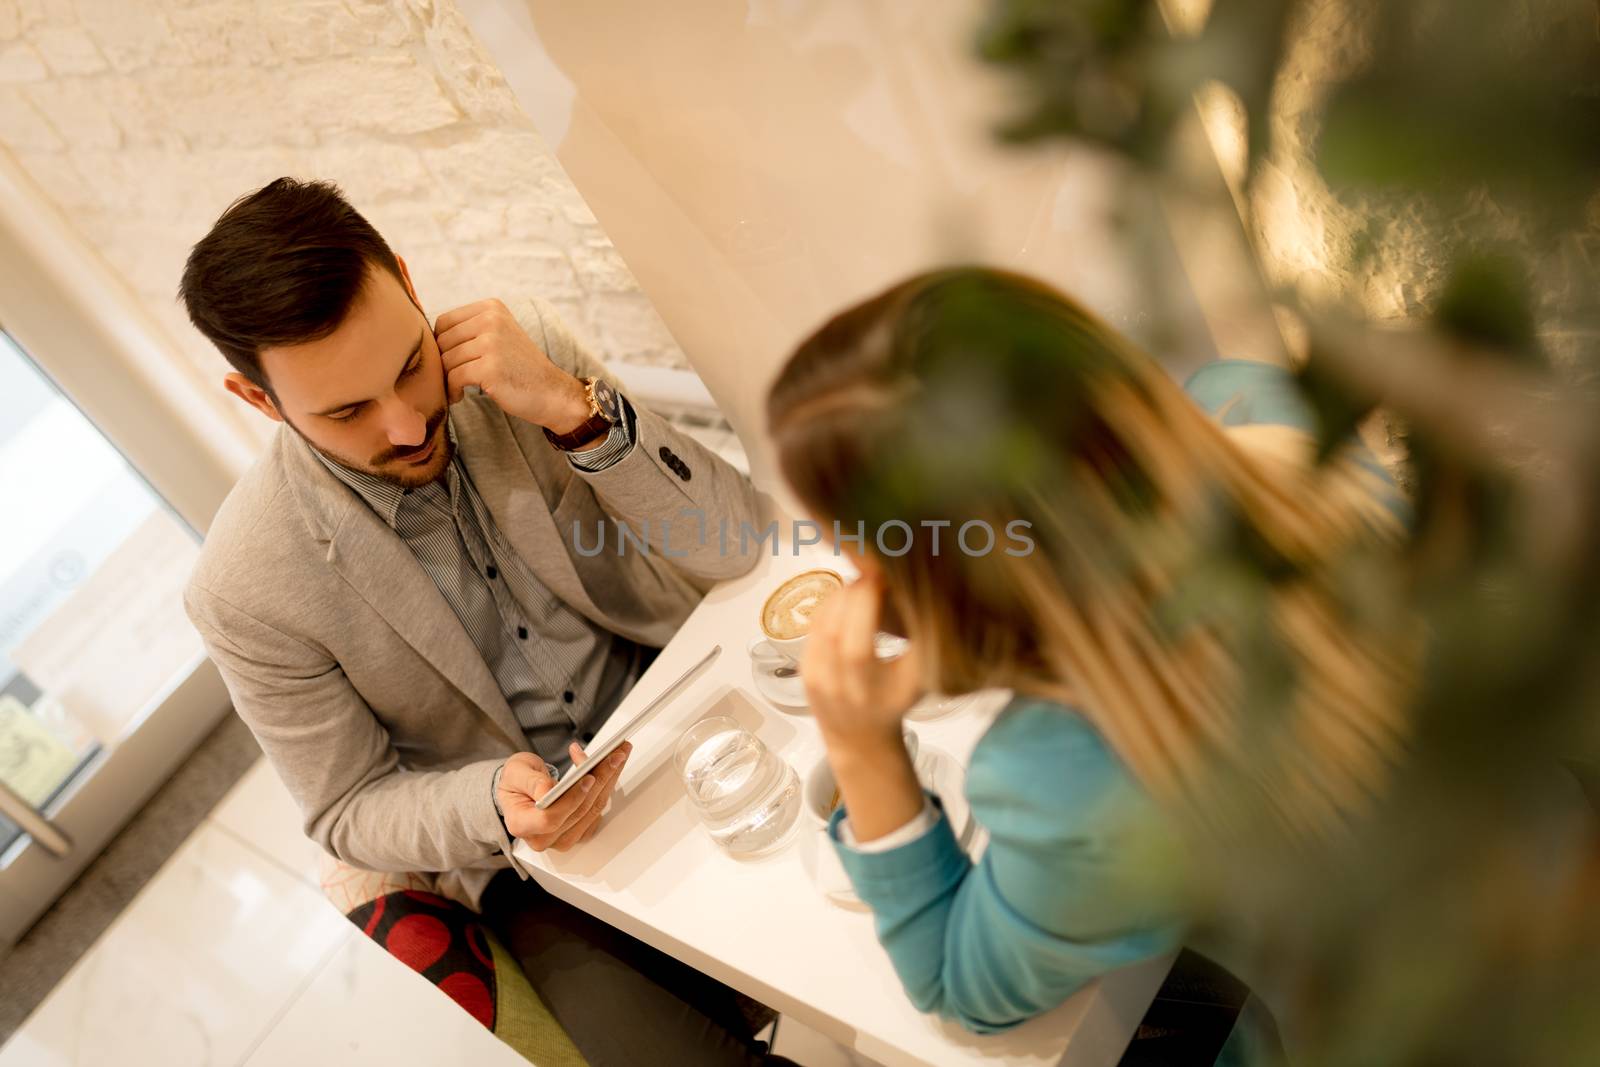 Young businesspeople on a break in a cafe. Pensive man working at tablet. Woman using smart phone. Selective focus. Focus on businessman.